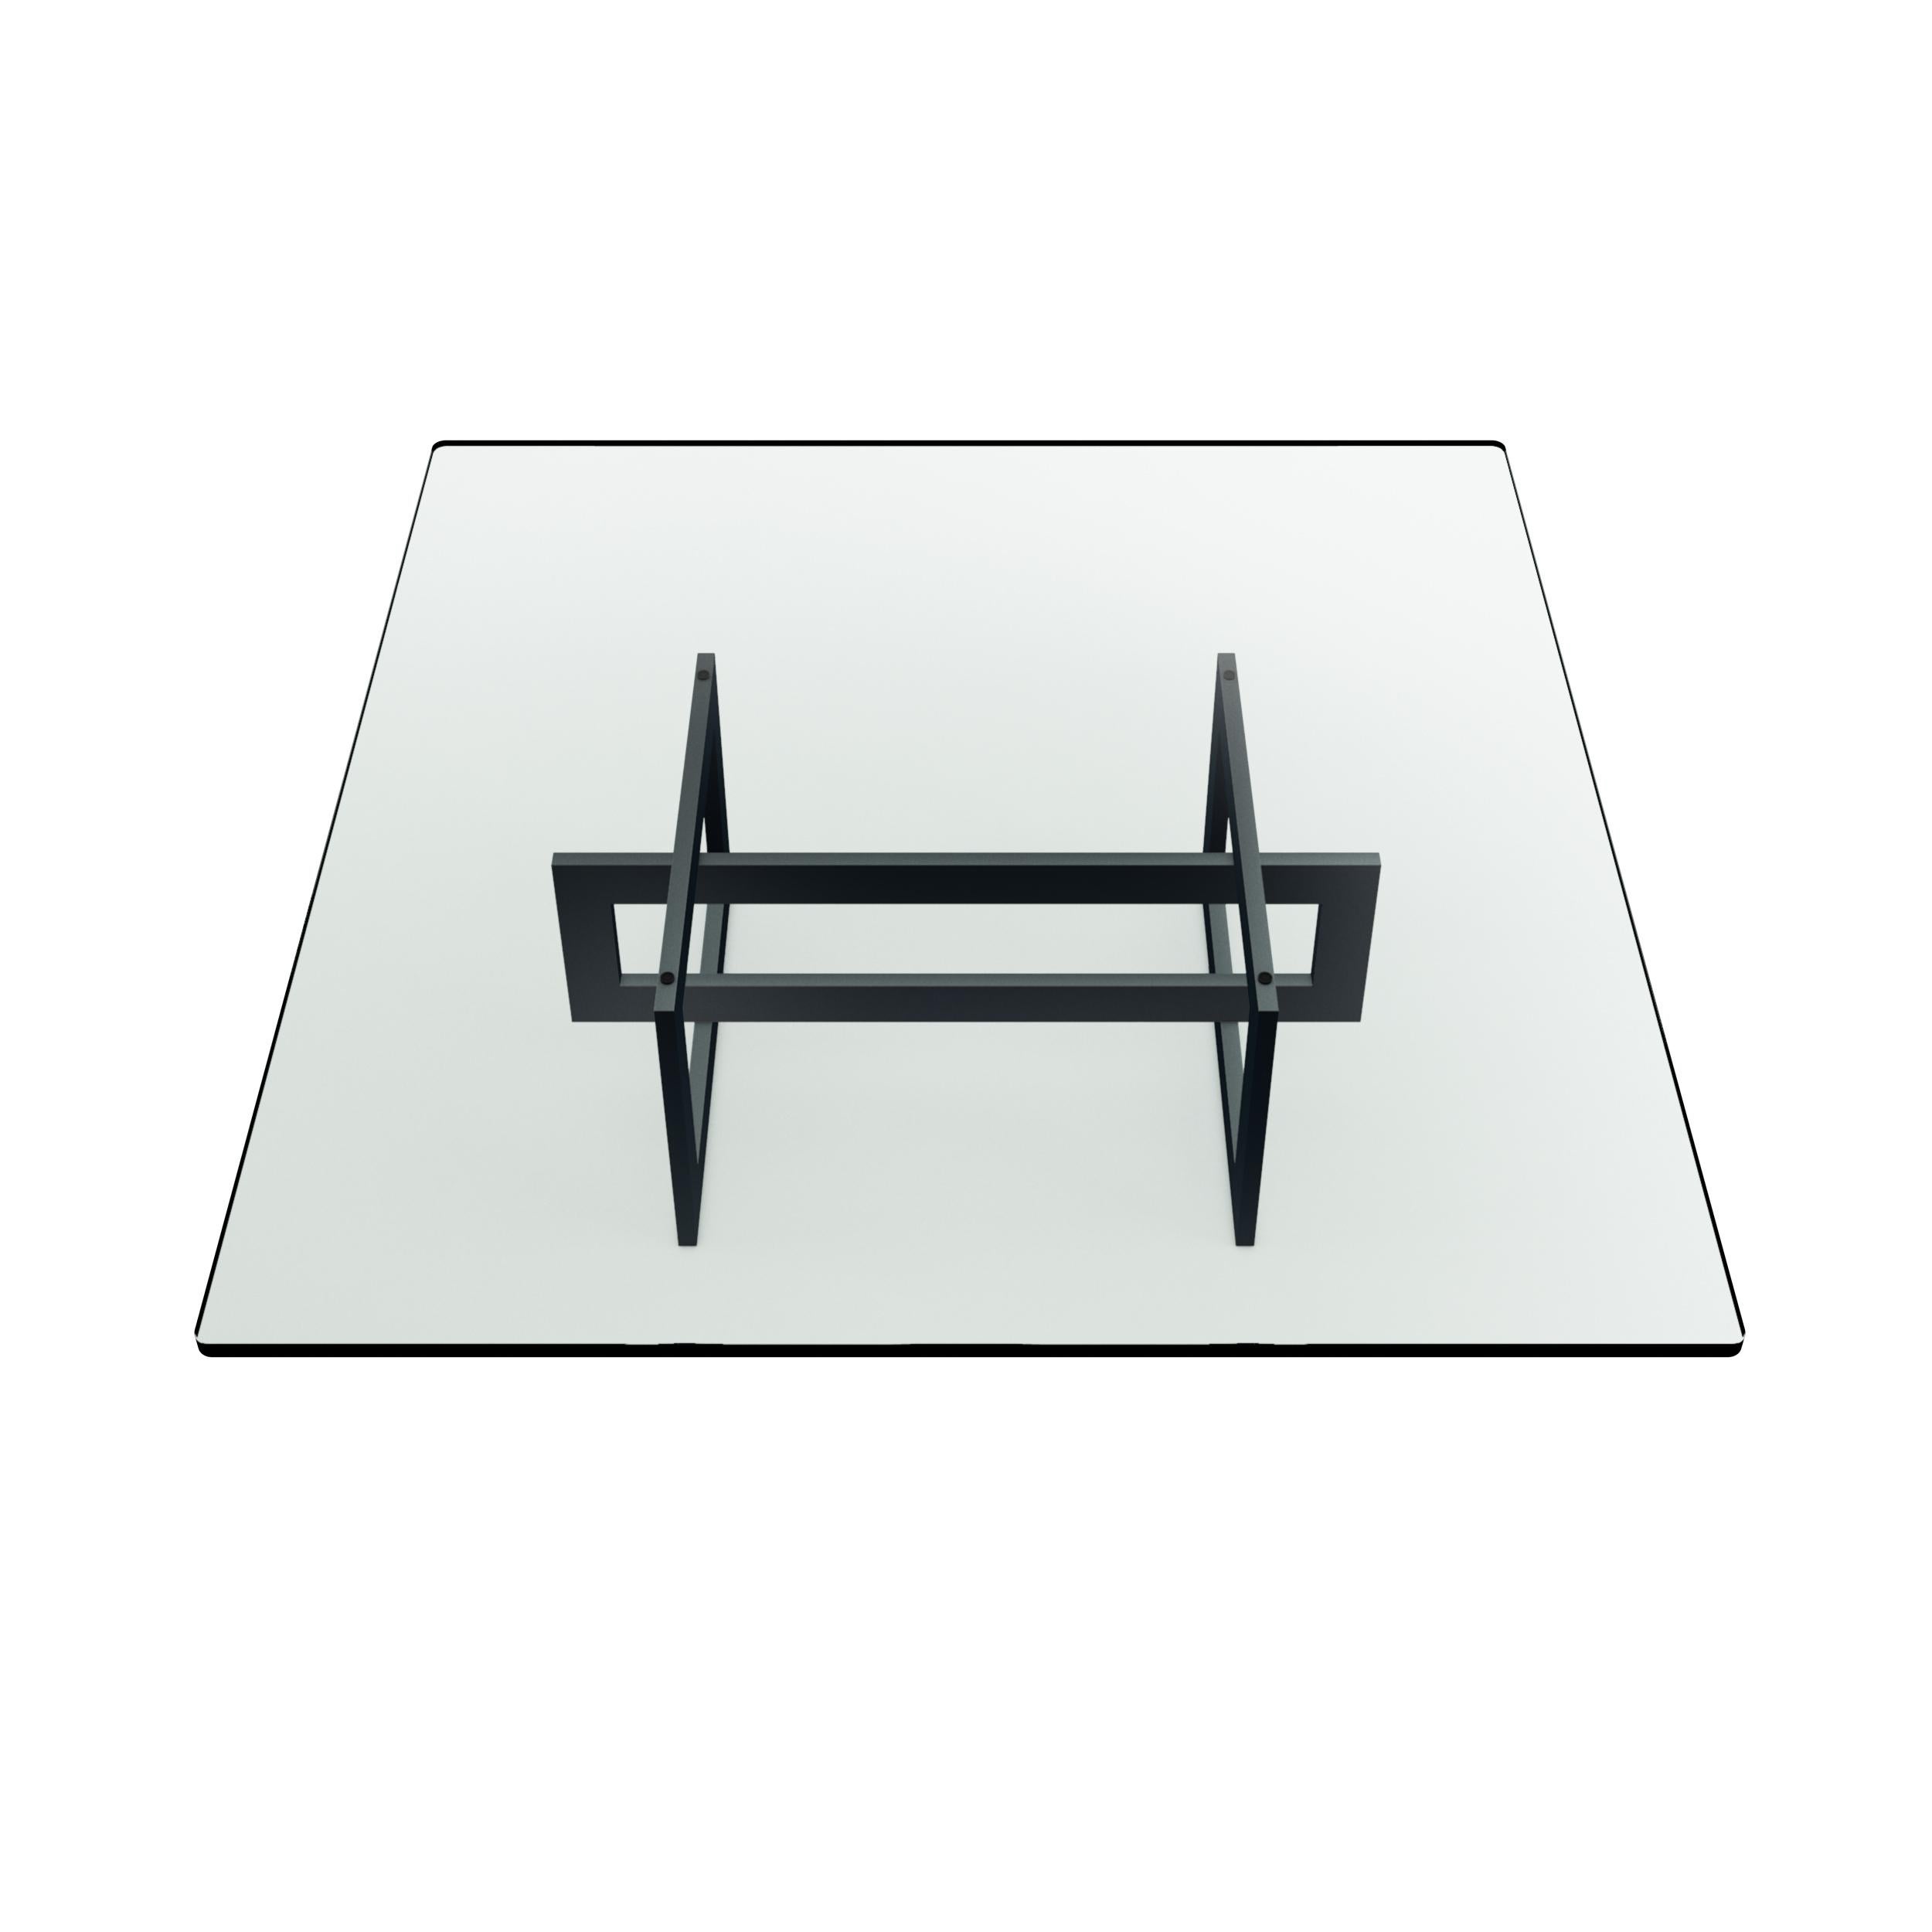 The low Jonathan table features a tubular metal 20 x 60mm frame, epoxy coated in glossy black color. Variable colors for the frame upon request.
The crystal top makes possible to see the whole frame in all its peculiarity like a